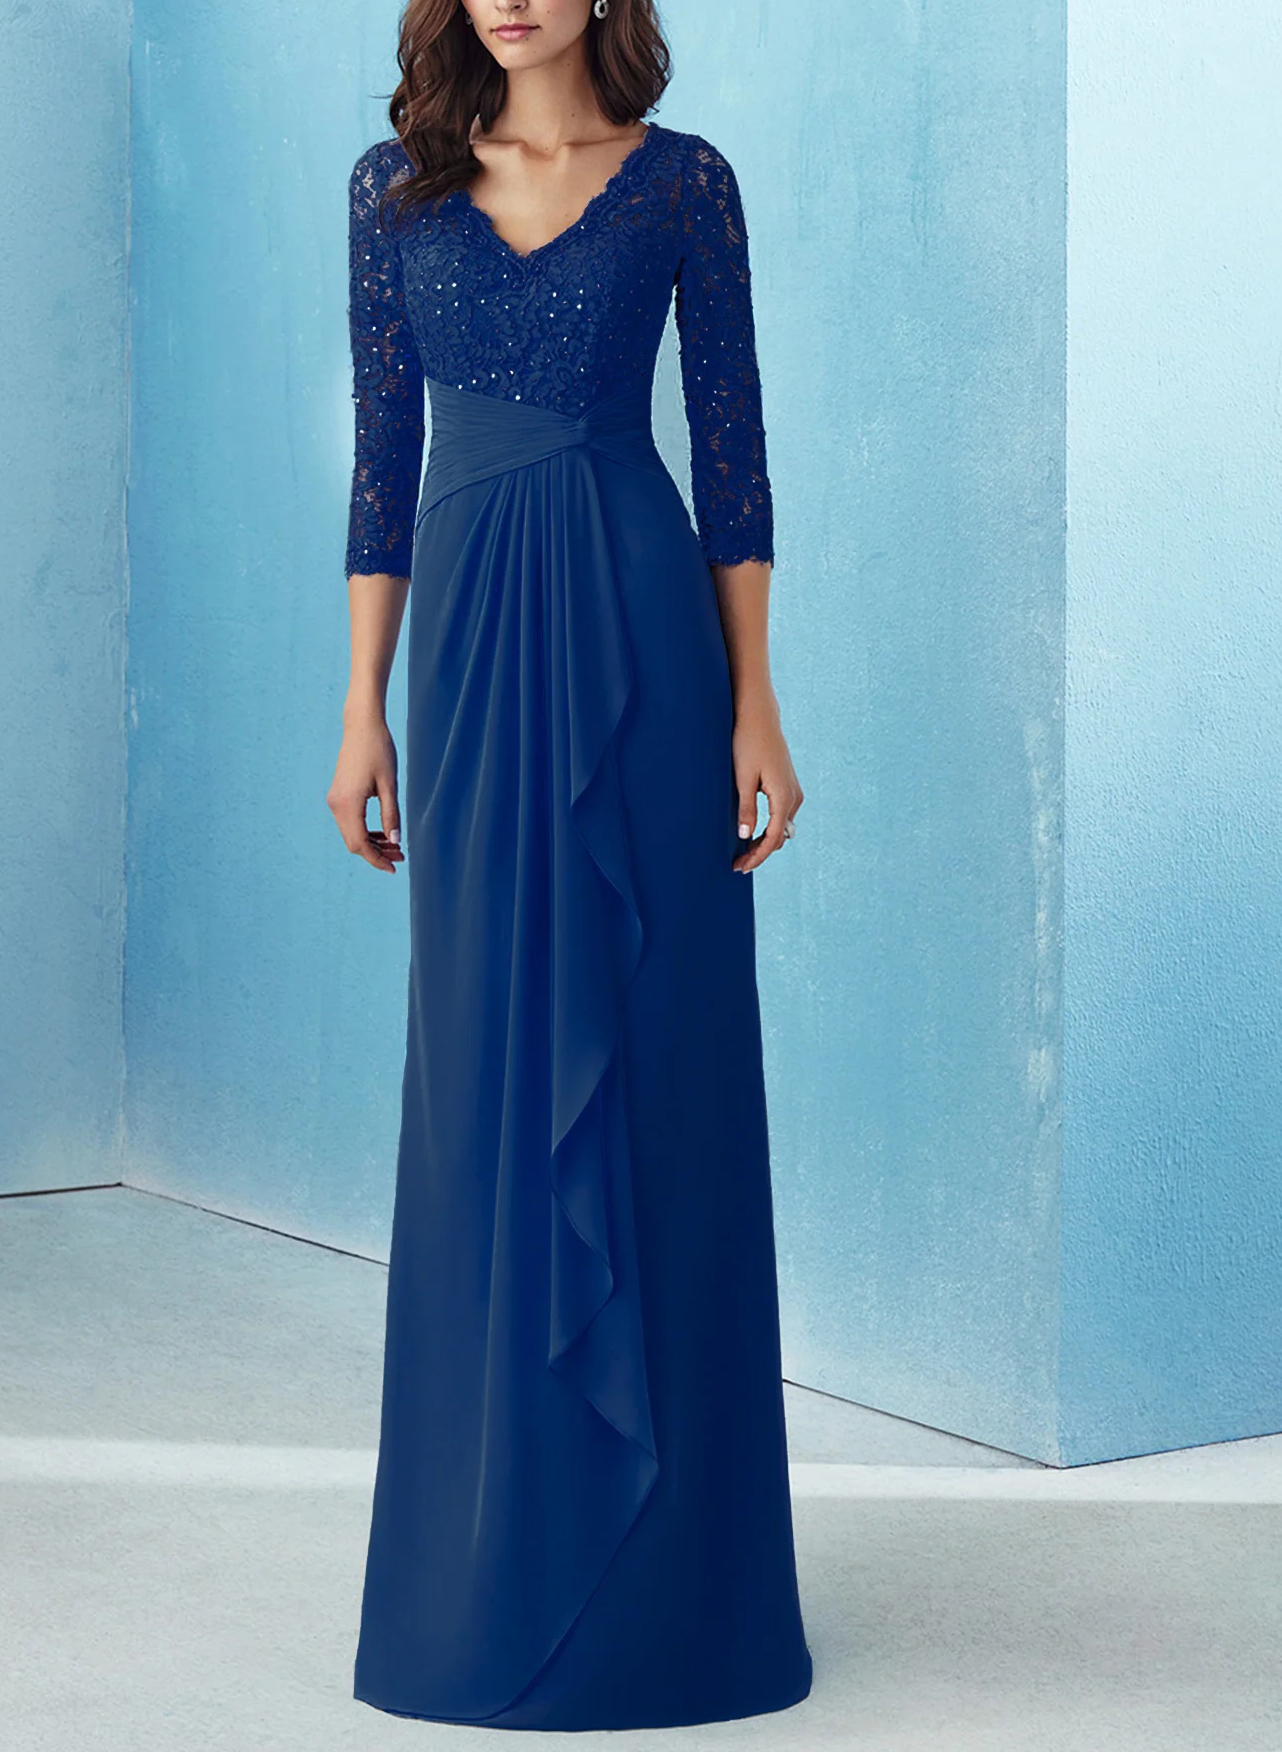 Navy Long Sheath/Column Sleeves Mother of the Bride Dresses With Lace